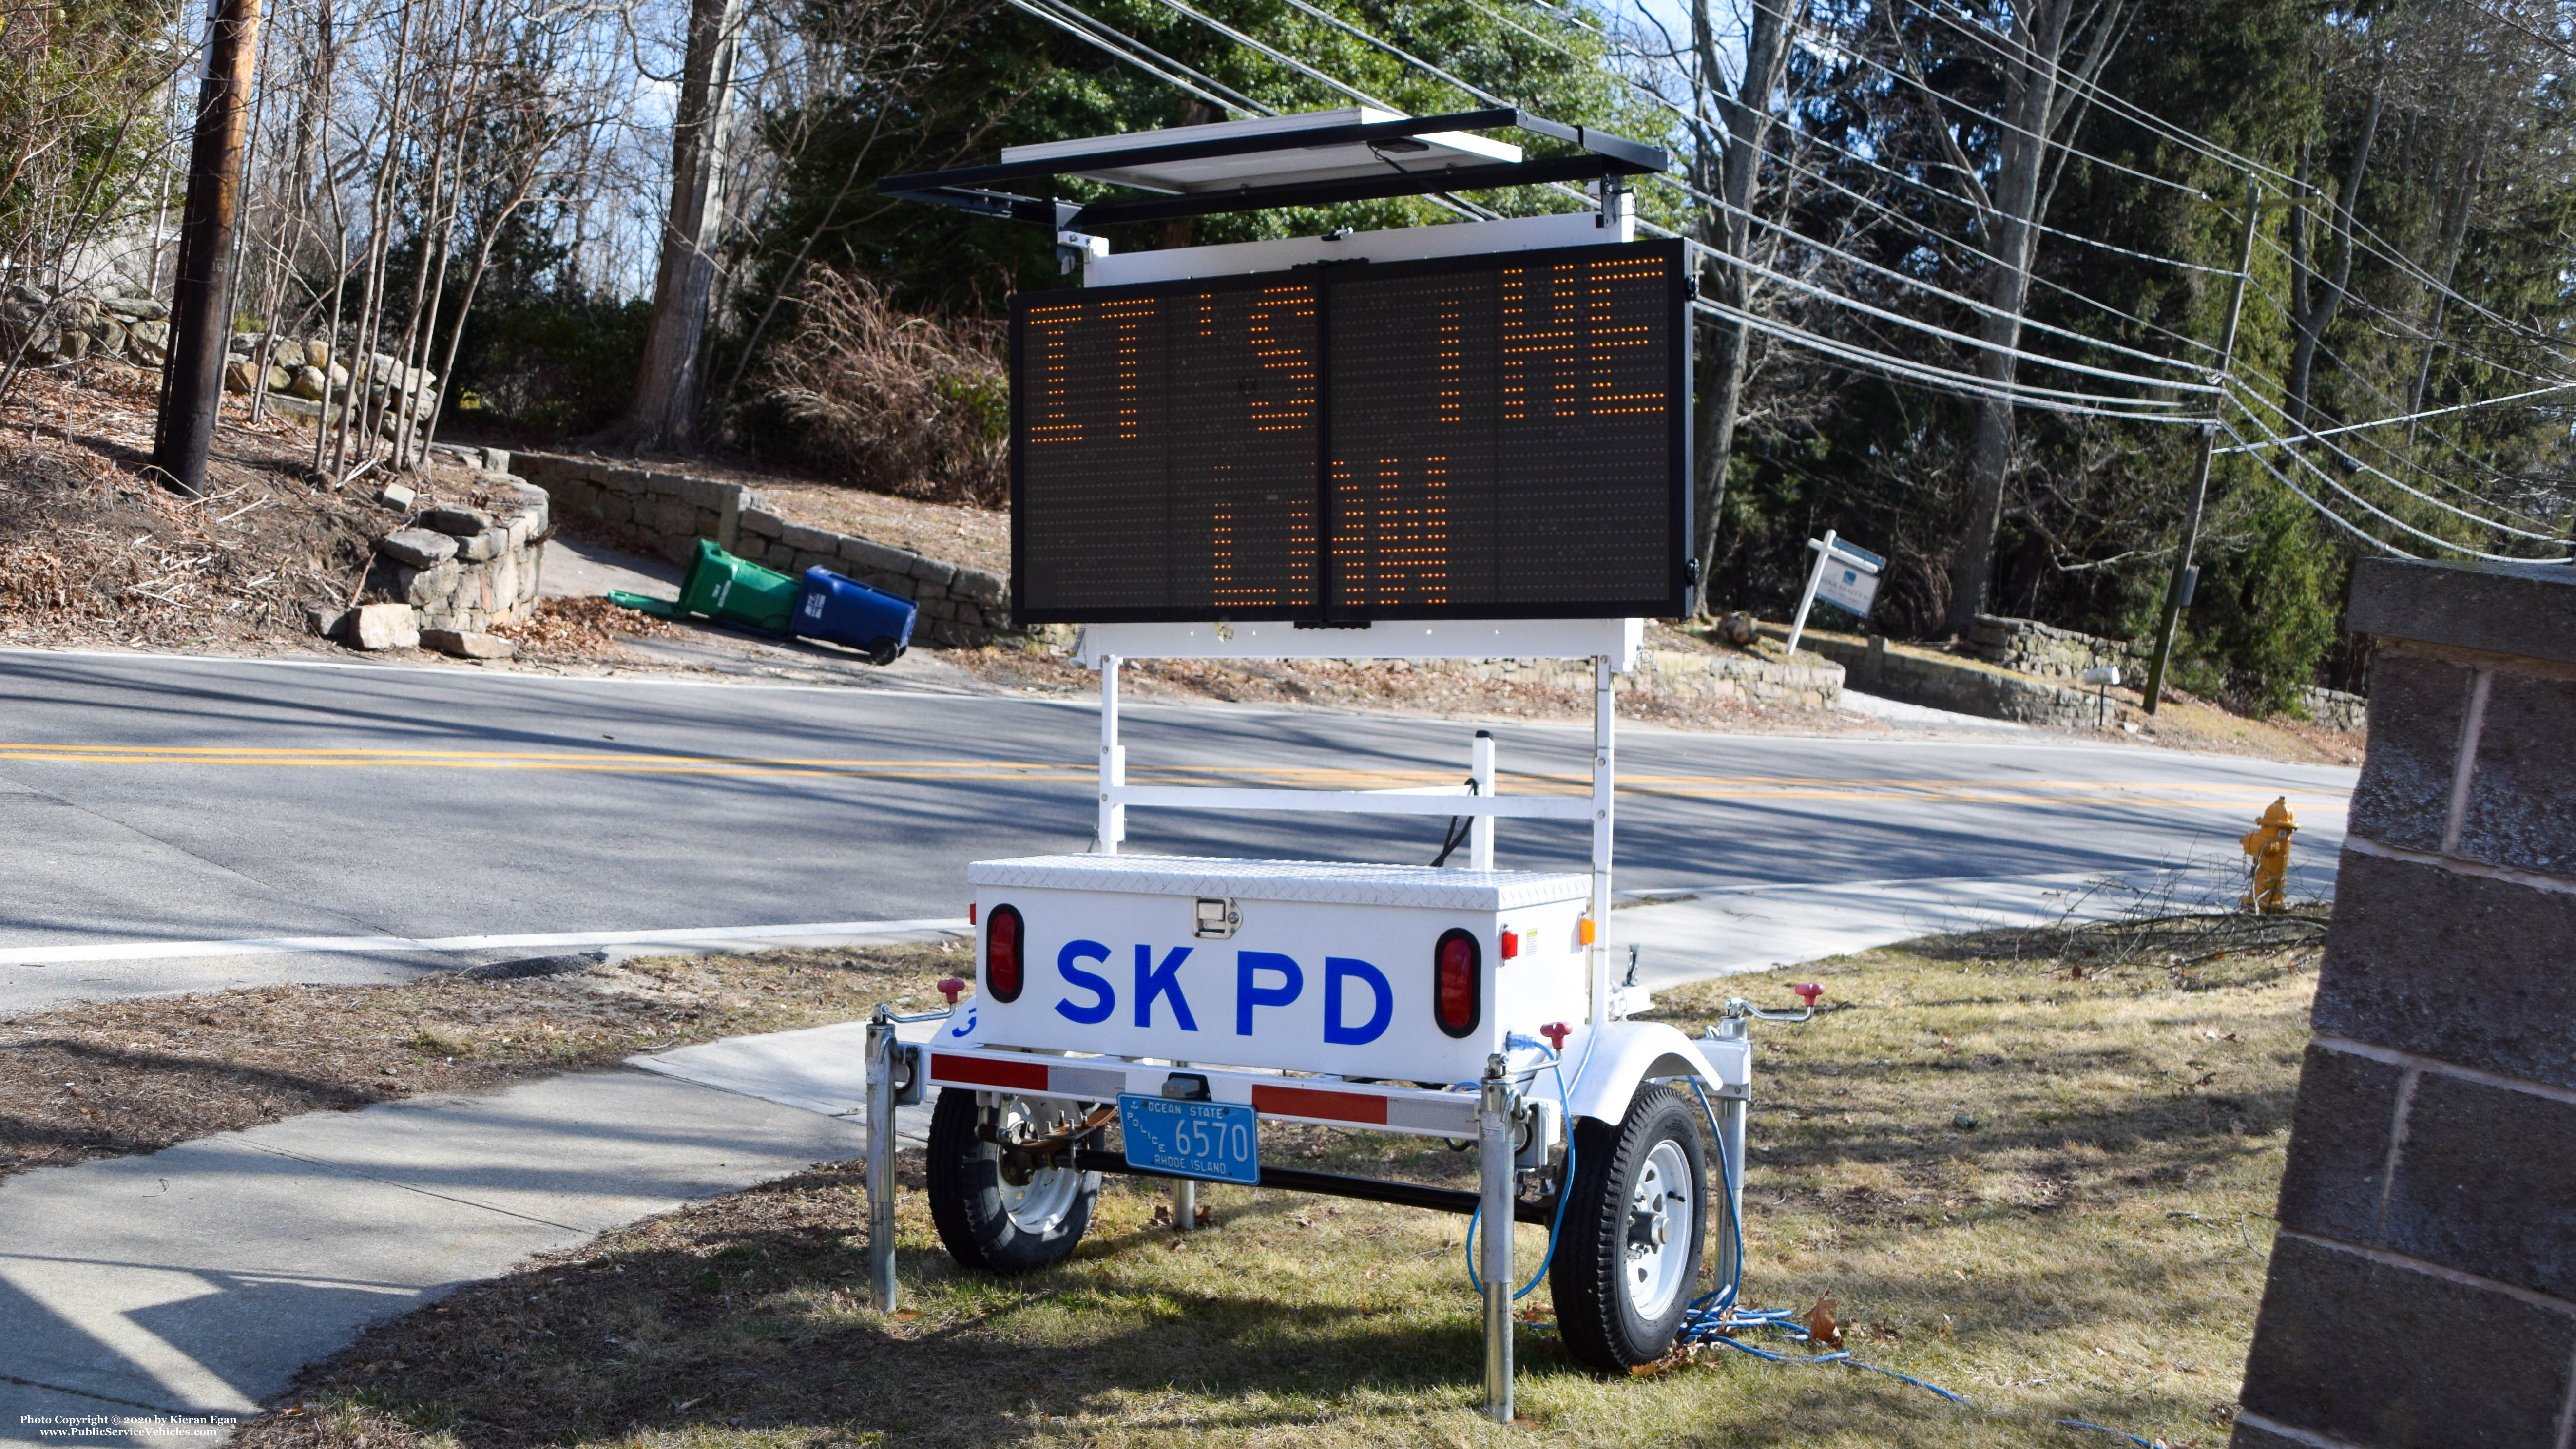 A photo  of South Kingstown Police
            Message Trailer 3, a 2006-2010 All Traffic Solutions Speed Trailer             taken by Kieran Egan